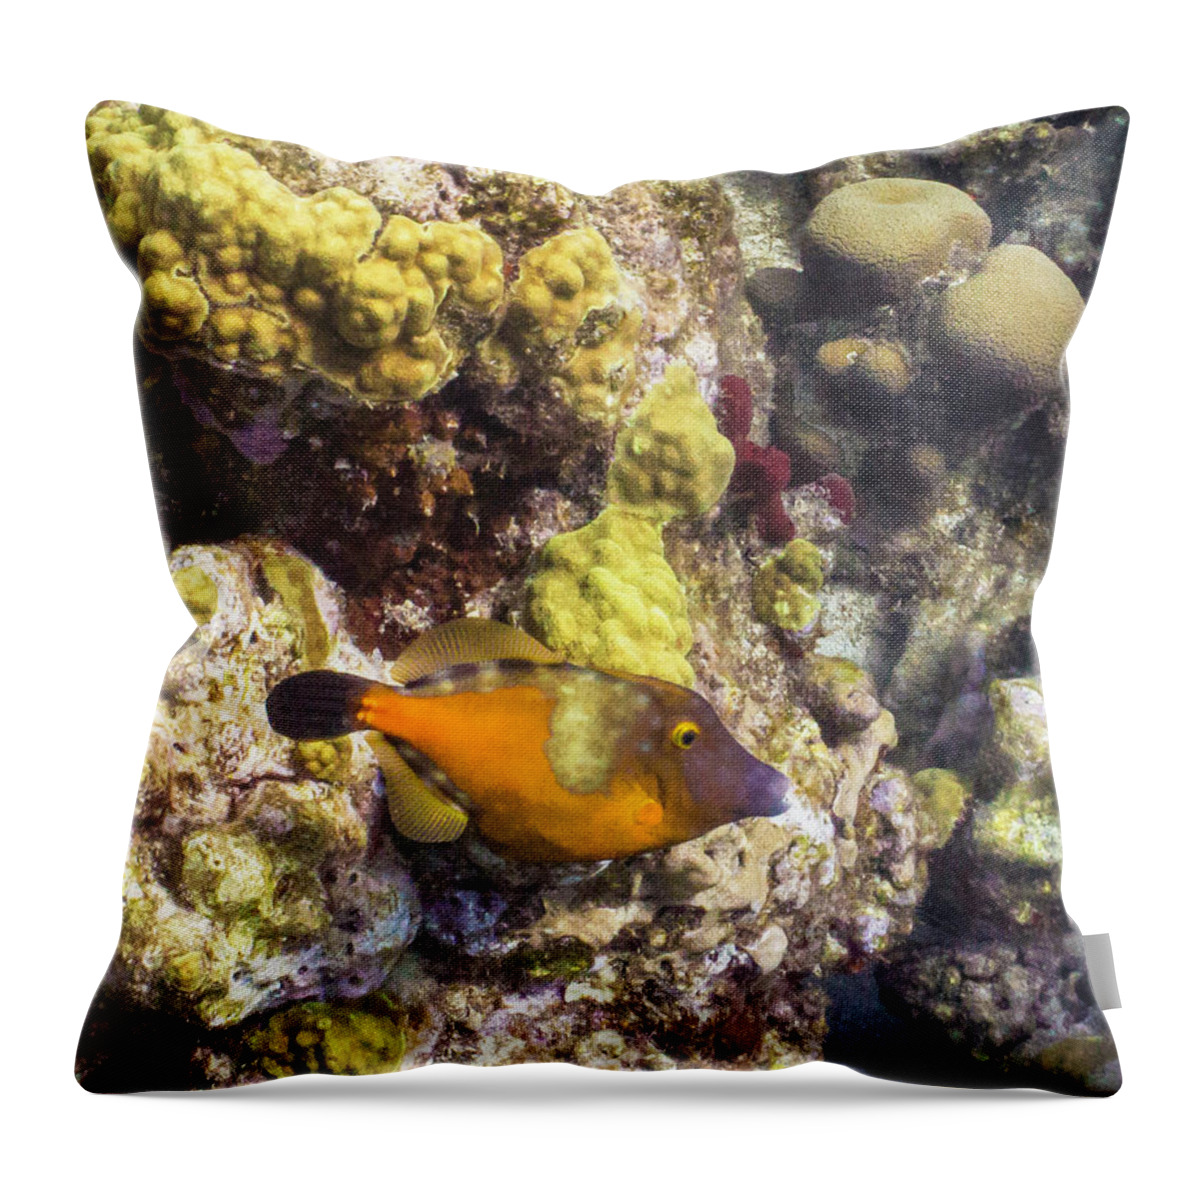 Ocean Throw Pillow featuring the photograph Not A Clown by Lynne Browne